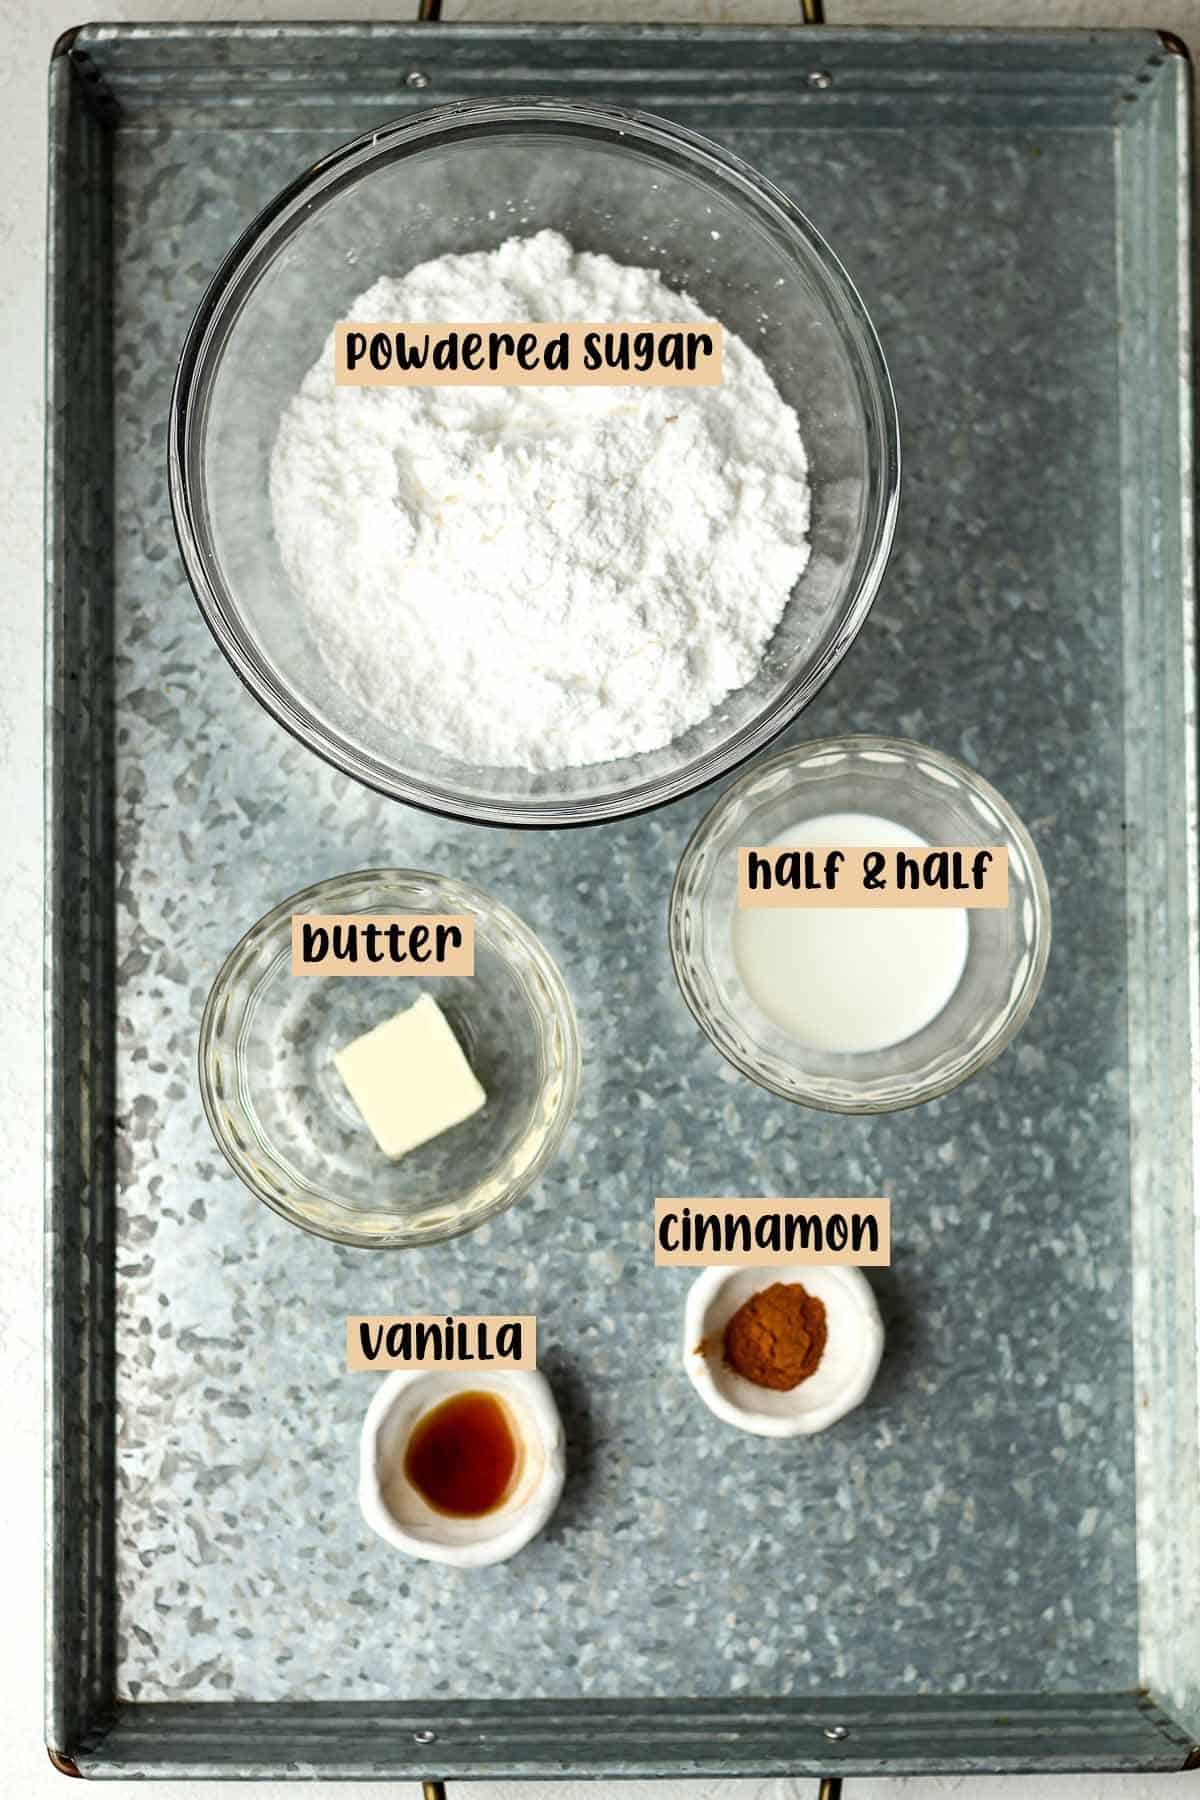 The cinnamon icing ingredients, labeled.